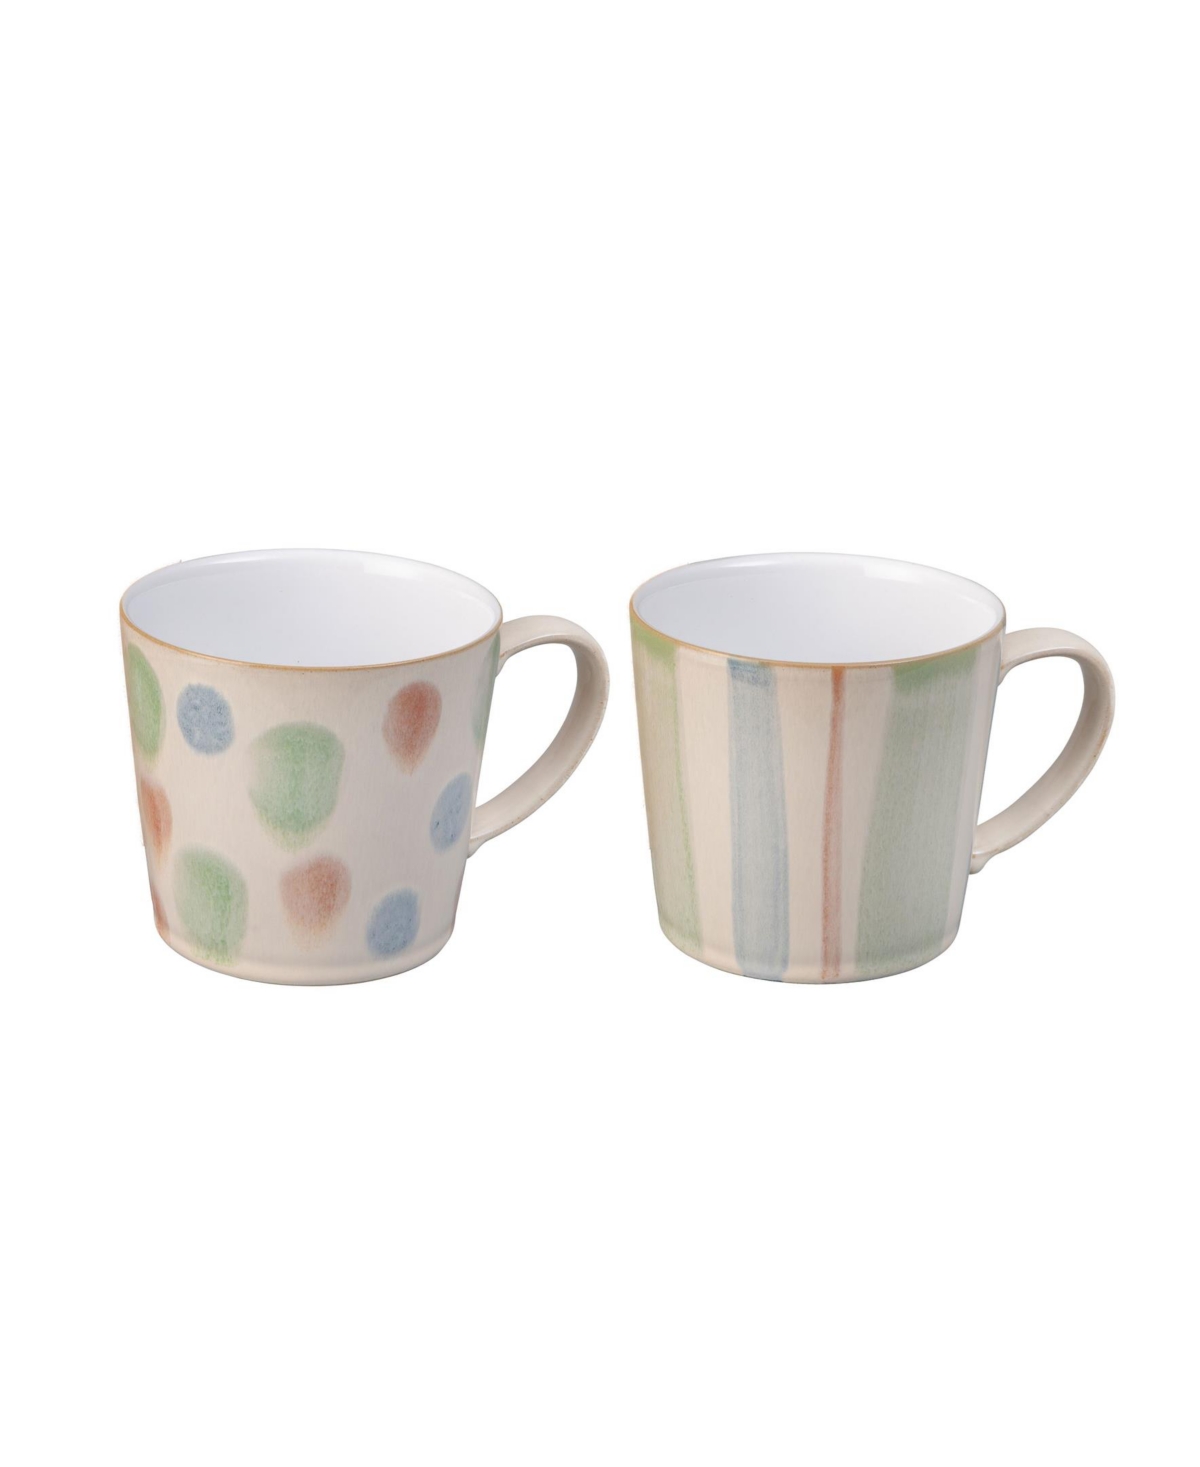 Pastel Multi Set of 2 Mugs - Multi Colored And Hand Painted